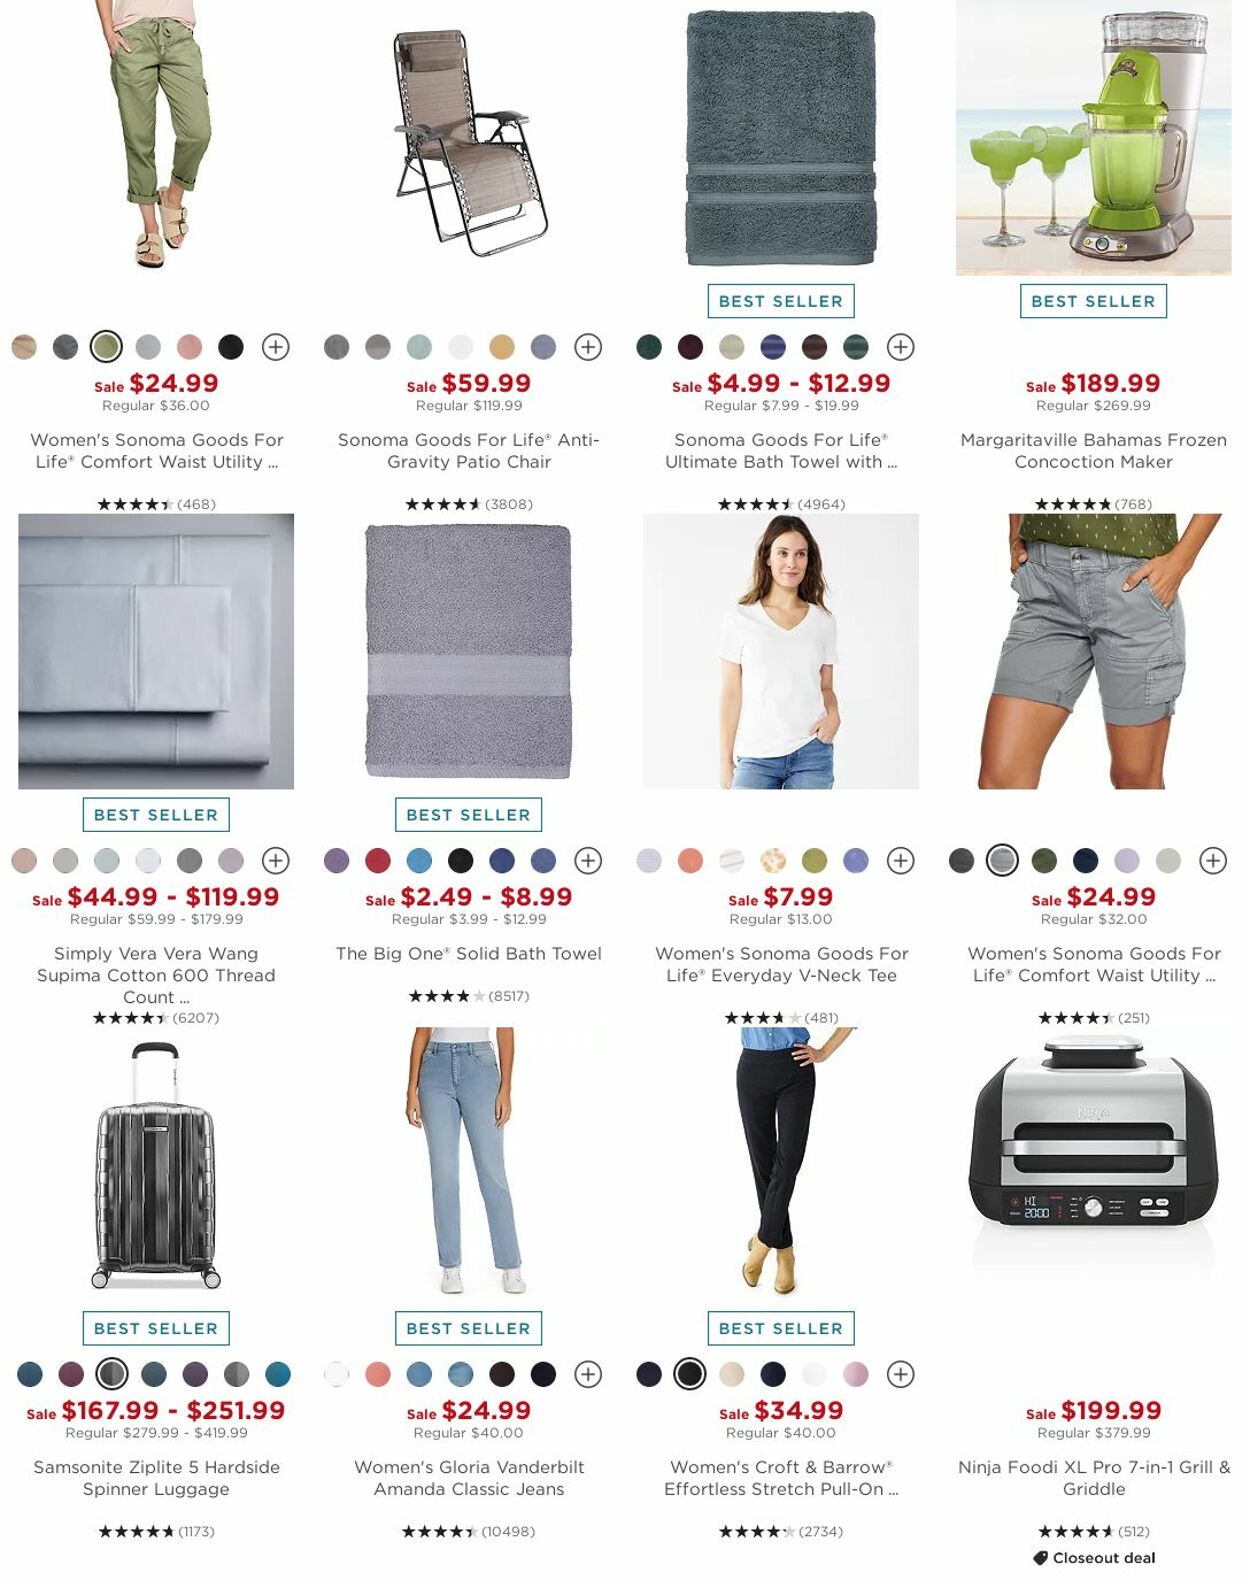 Kohl's Promotional weekly ads